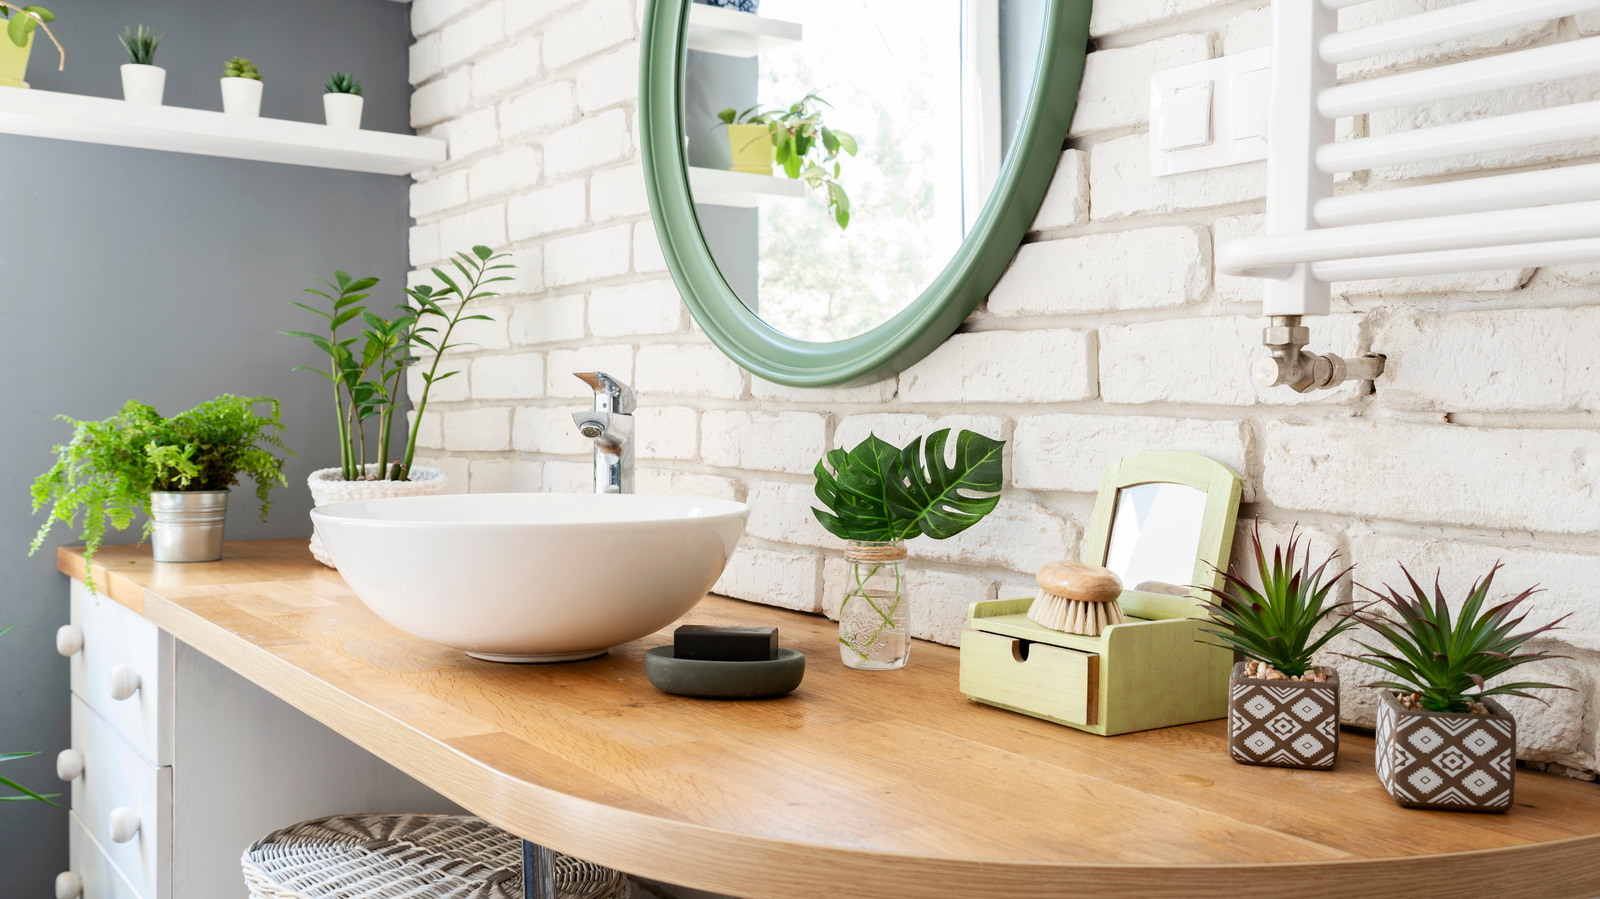 Trendy Bathroom Products That Are Really Worth The Hype, According To ...